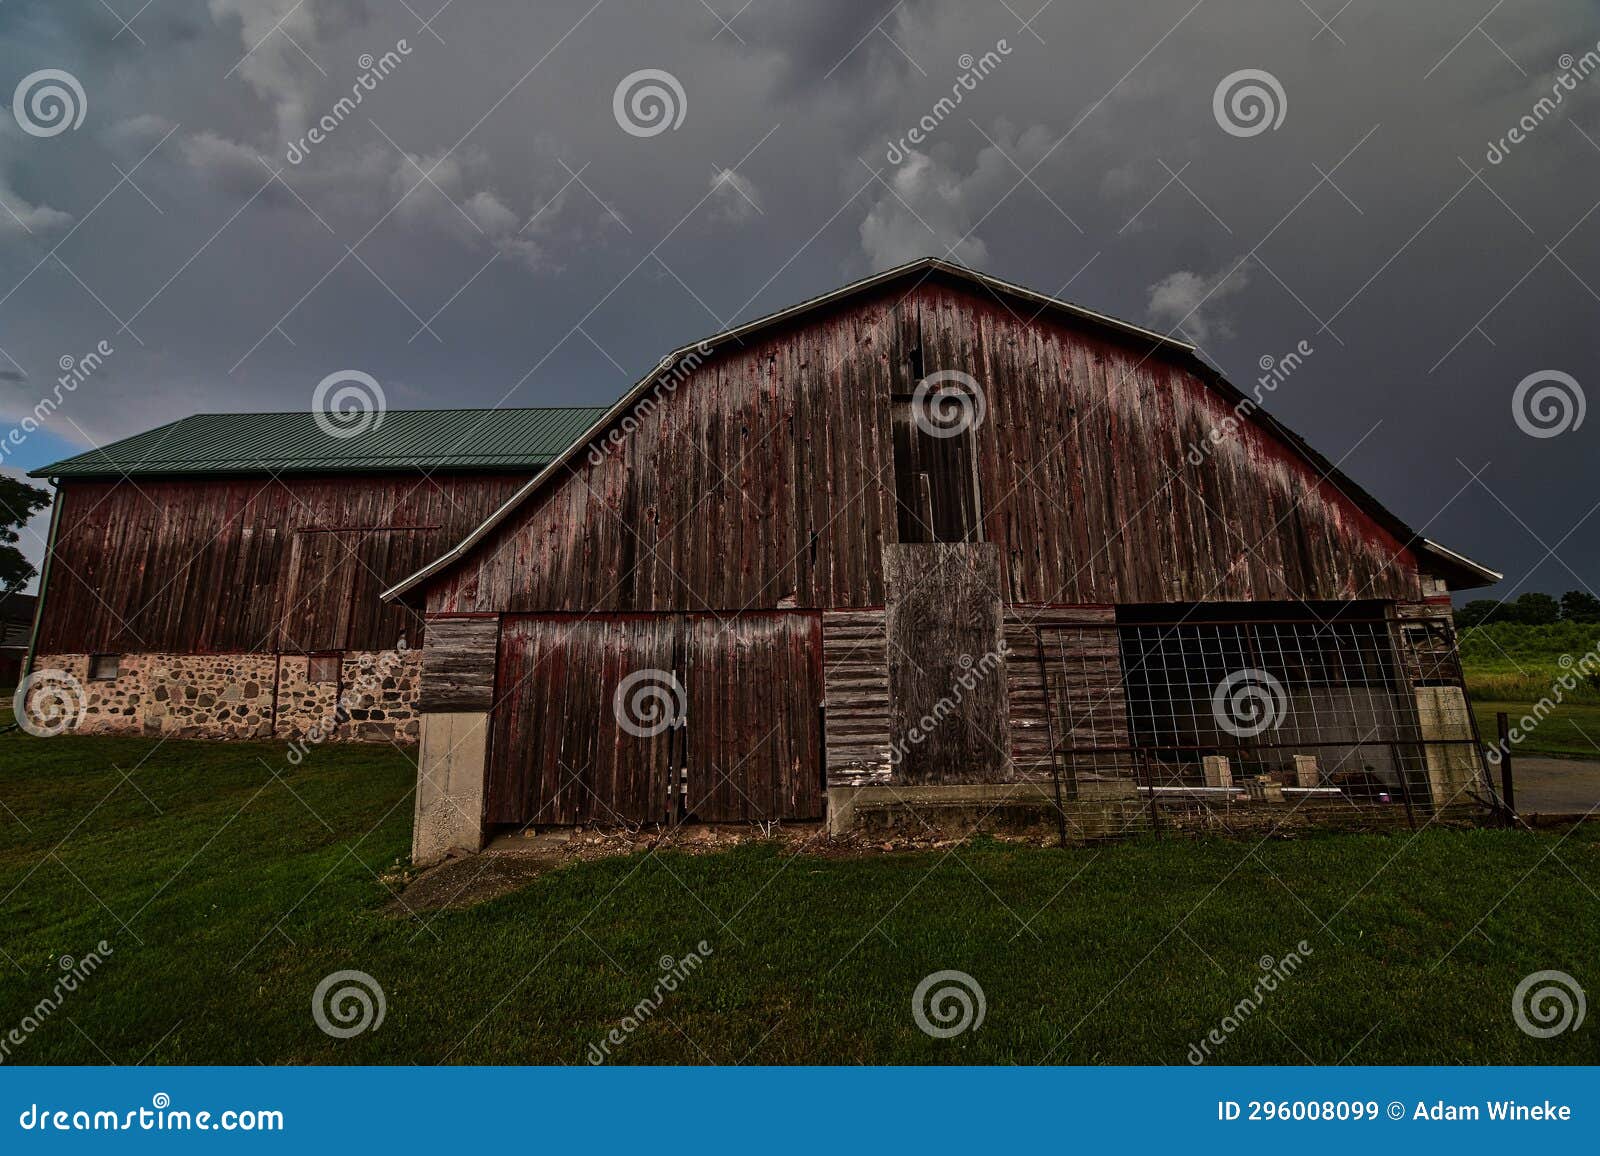 barn at dorothy carnes state natural area in wi